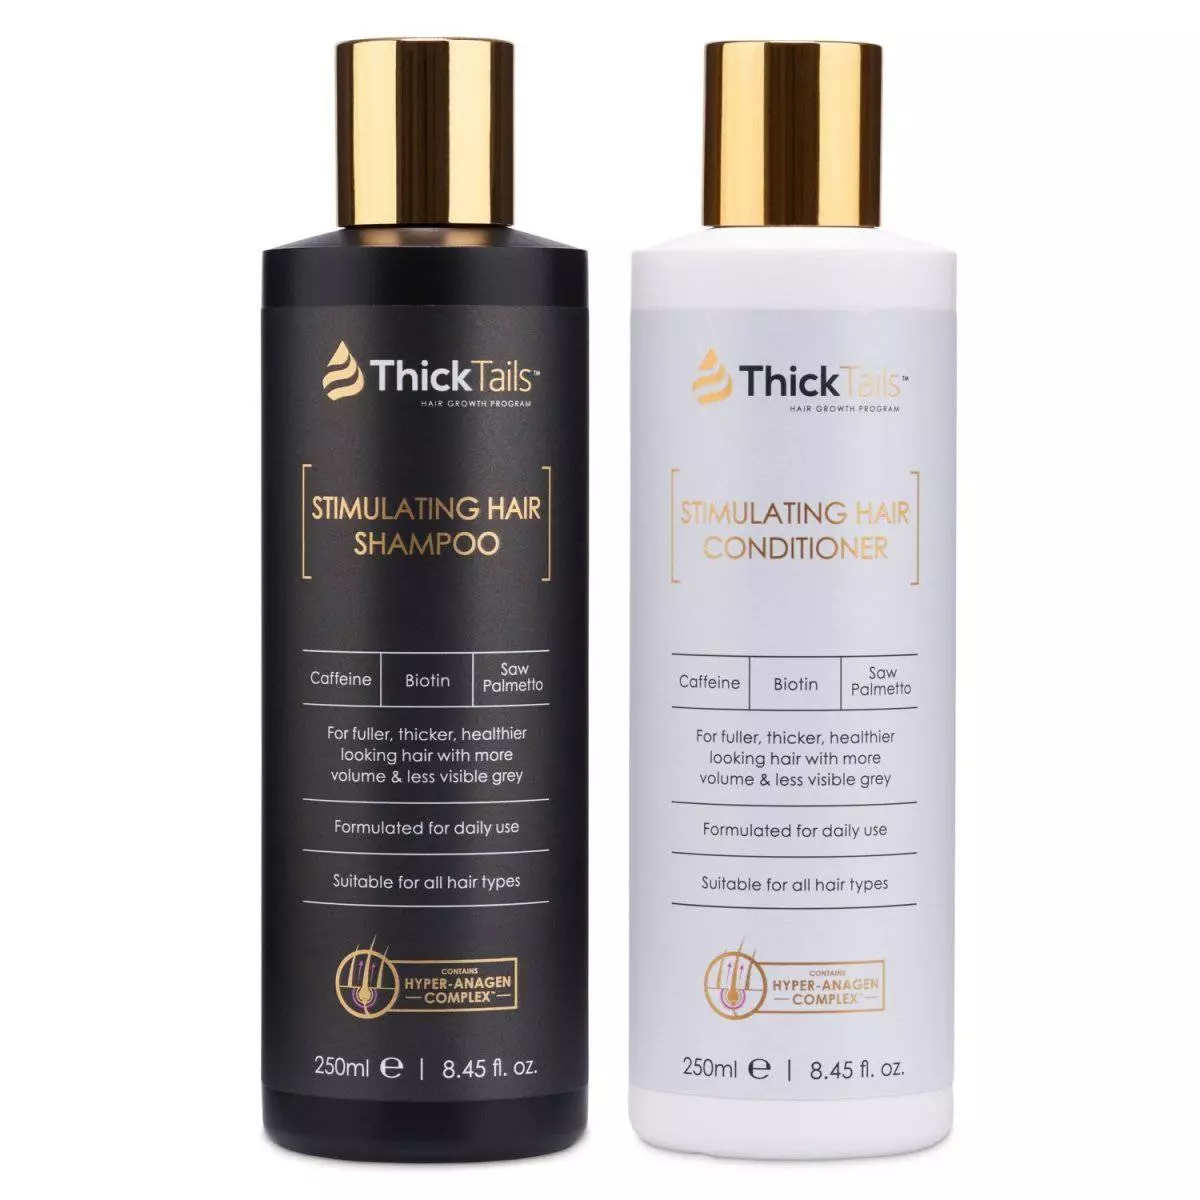 Thick Tails Stimulating Hair Shampoo And Conditioner